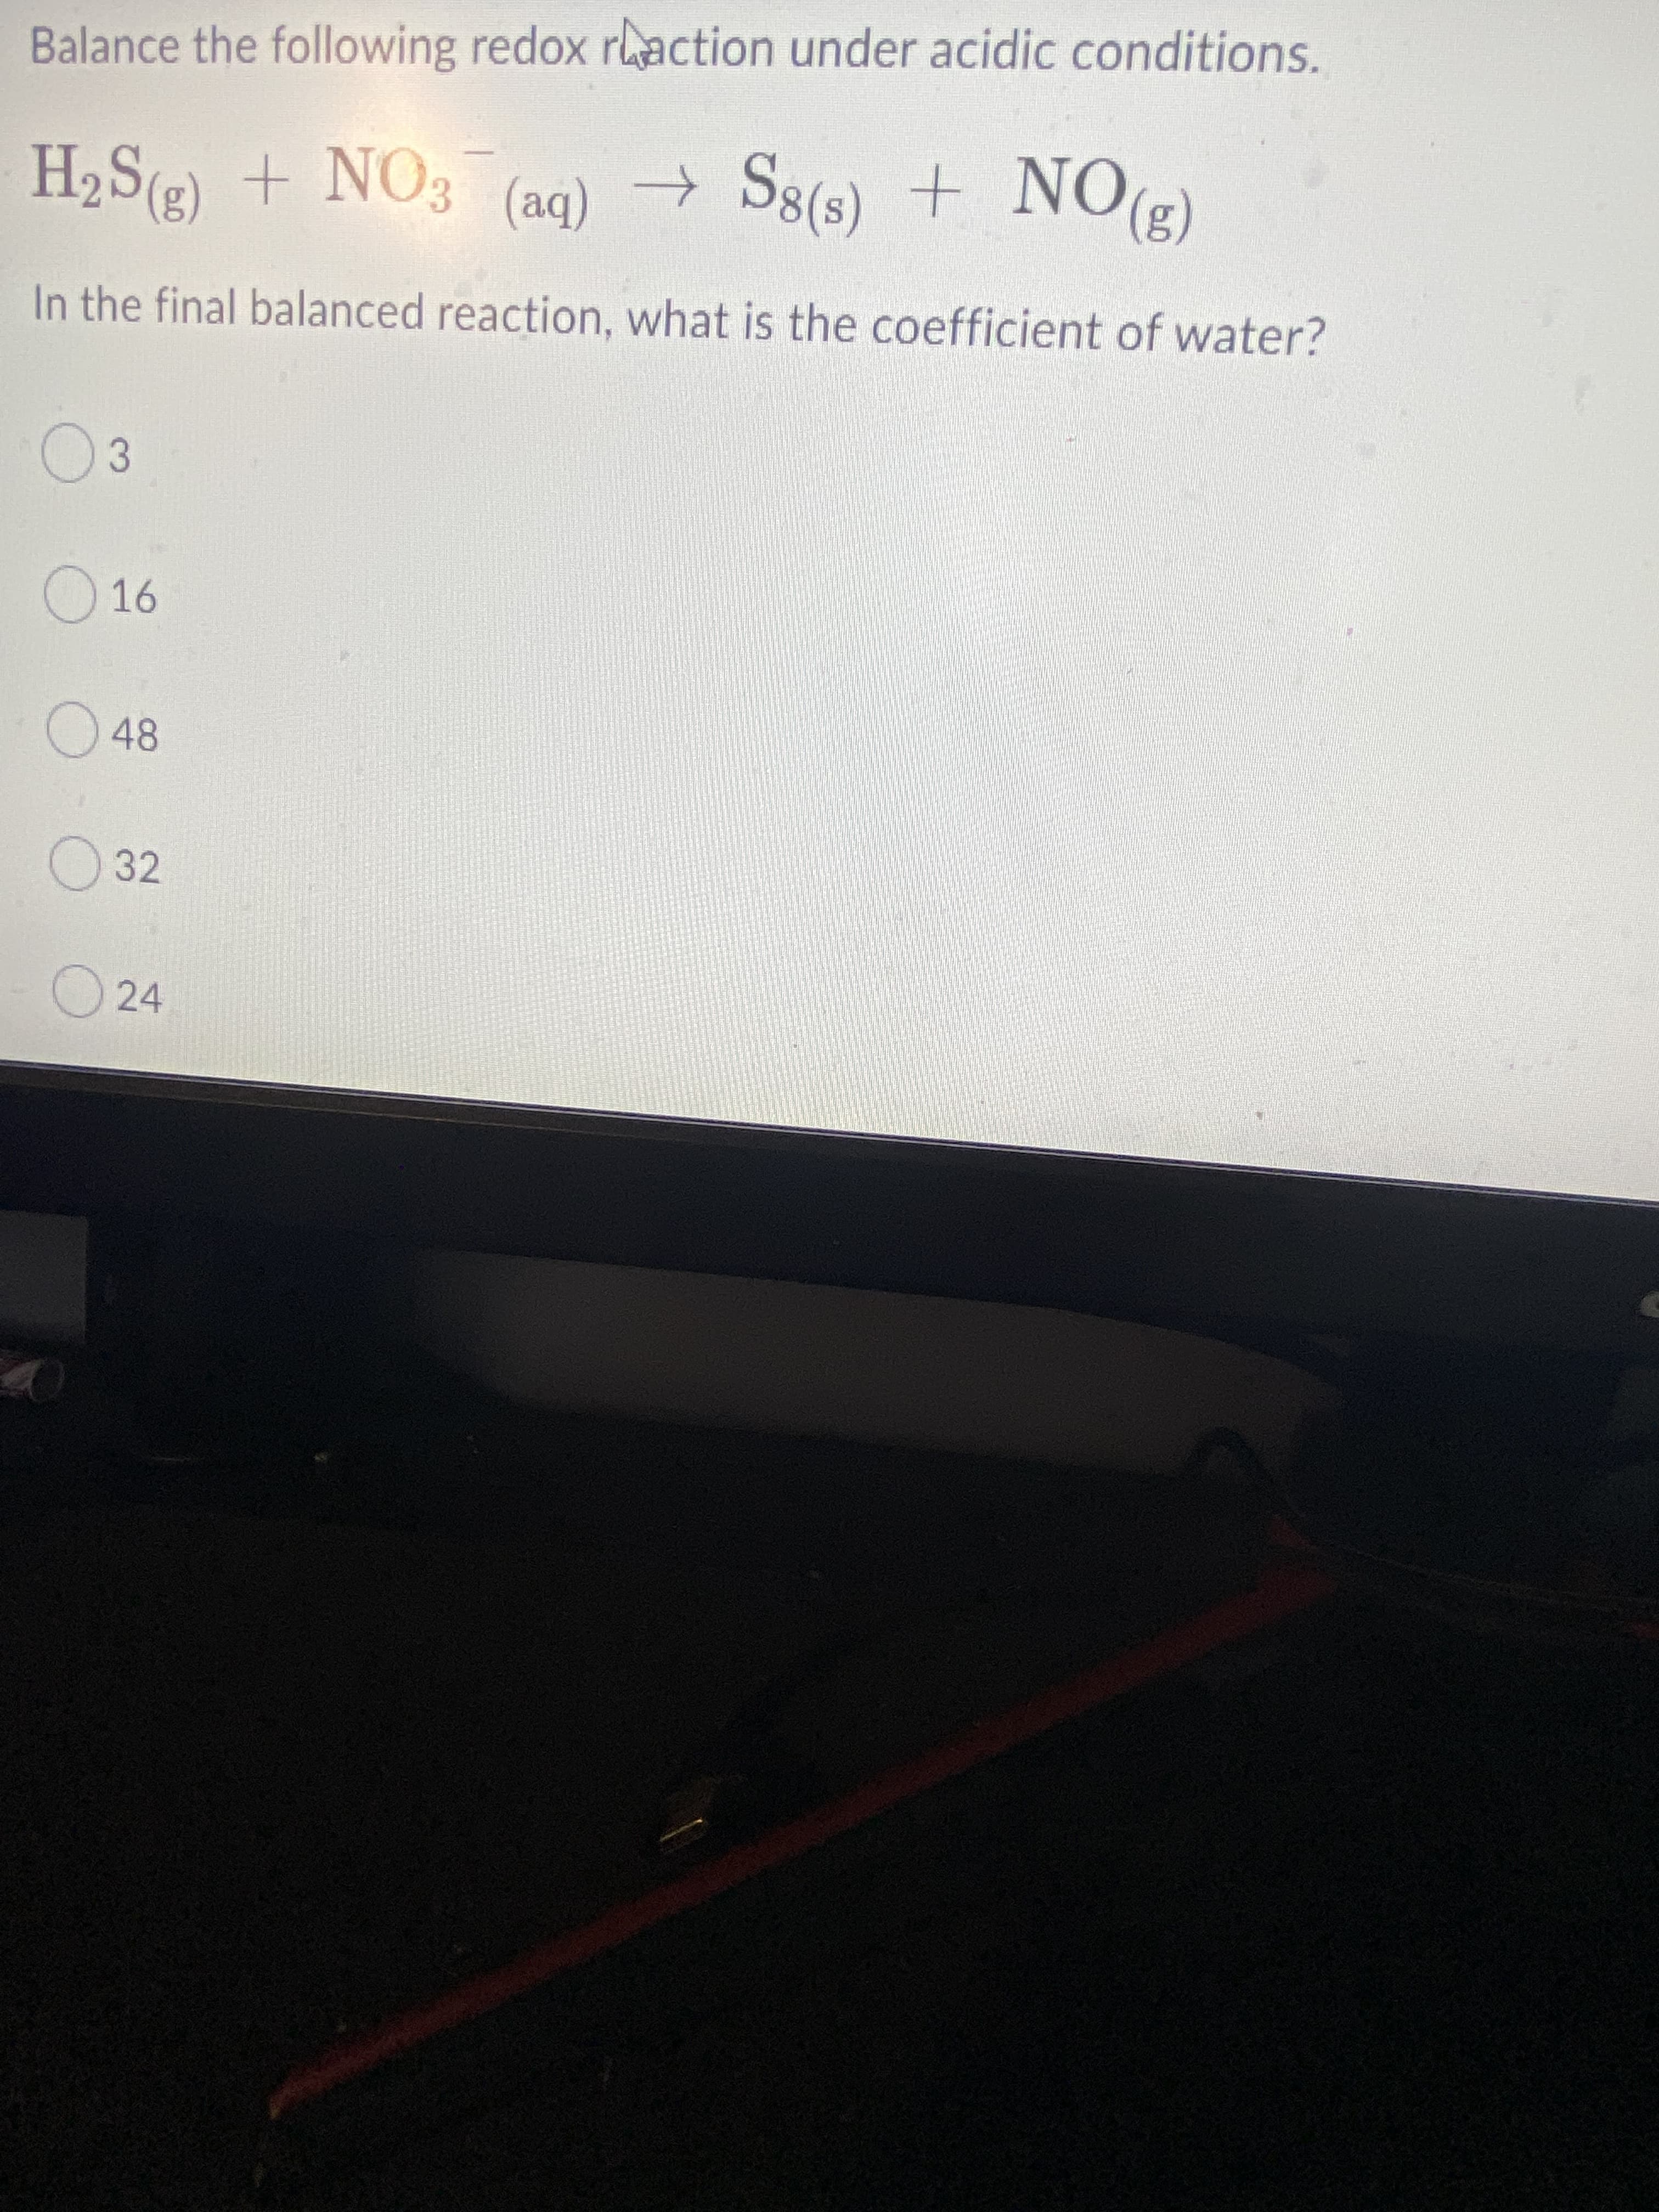 Balance the following redox raction under acidic conditions.
H2S(g) + NO3 (ag) →
(3)ON
In the final balanced reaction, what is the coefficient of water?
S8(s) + NO2)
(ba)
03
16
O 32
O 24
